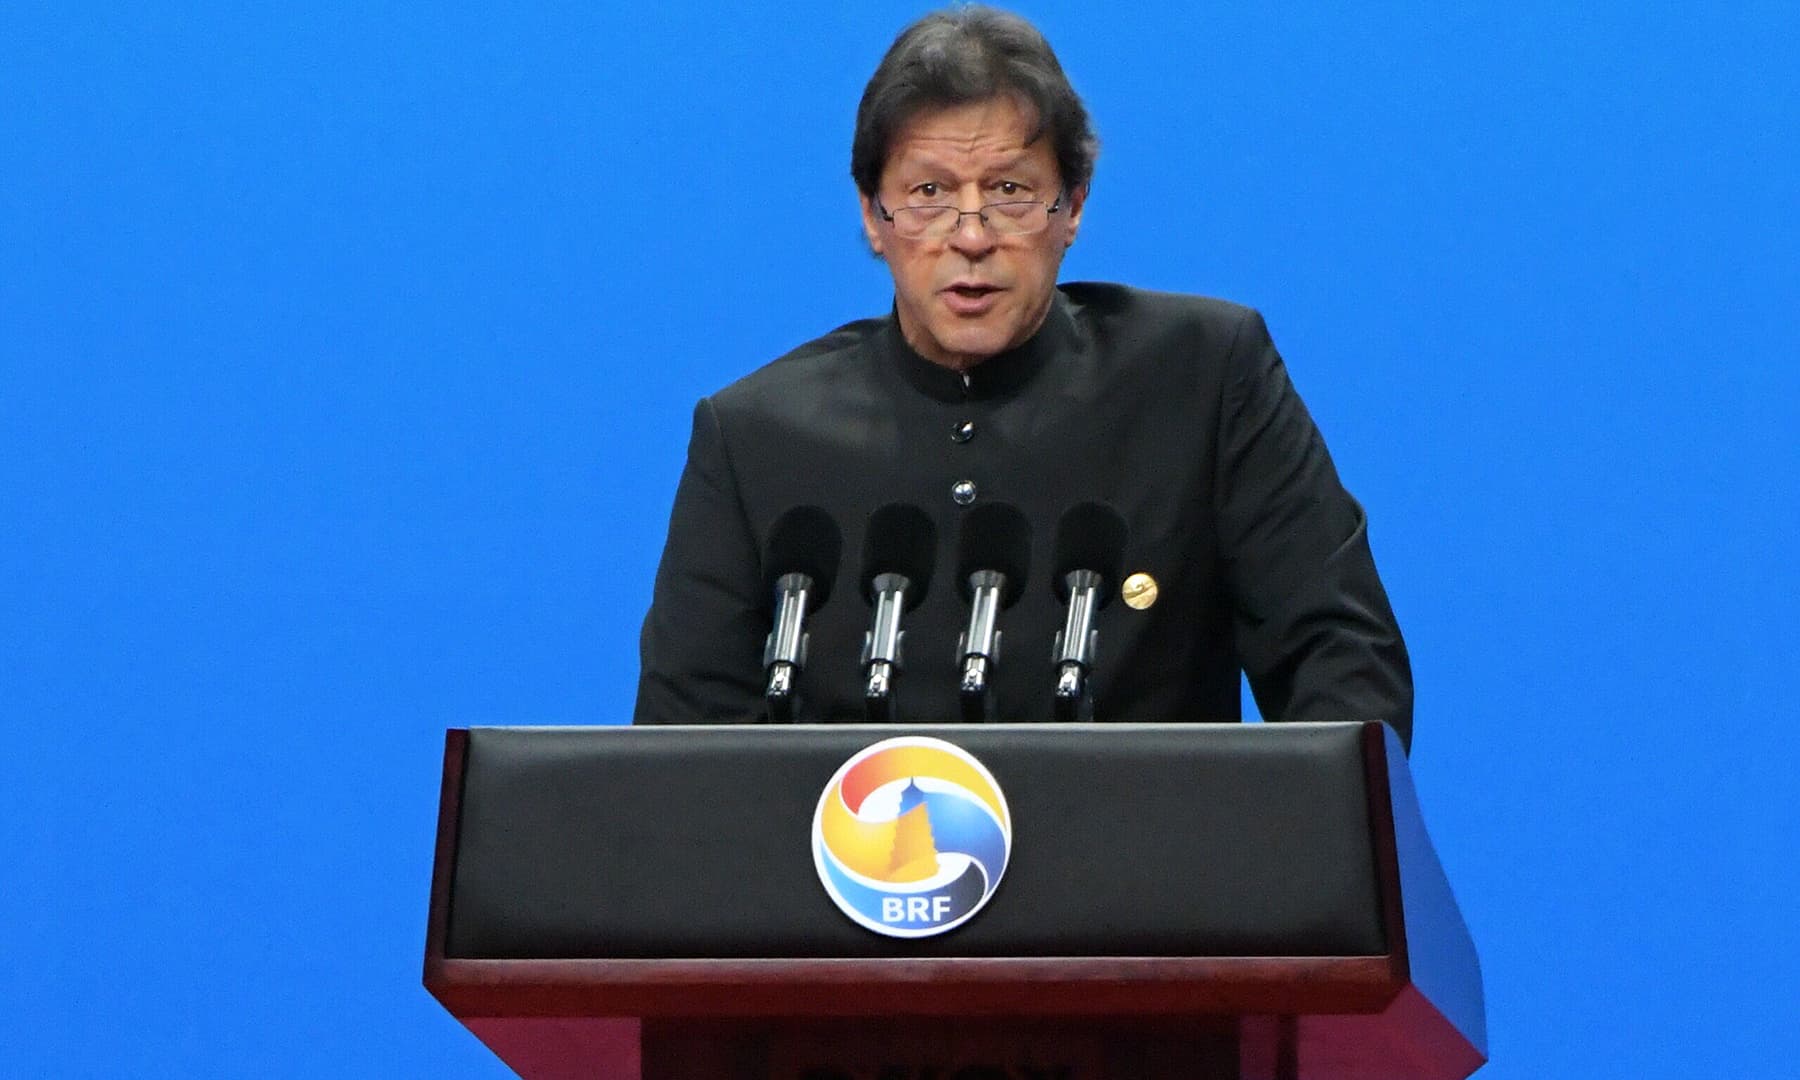 Pakistani Prime Minister Imran Khan speaks during the opening ceremony of the Belt and Road Forum in Beijing in April 26, 2019. (Photo by FRED DUFOUR / AFP)